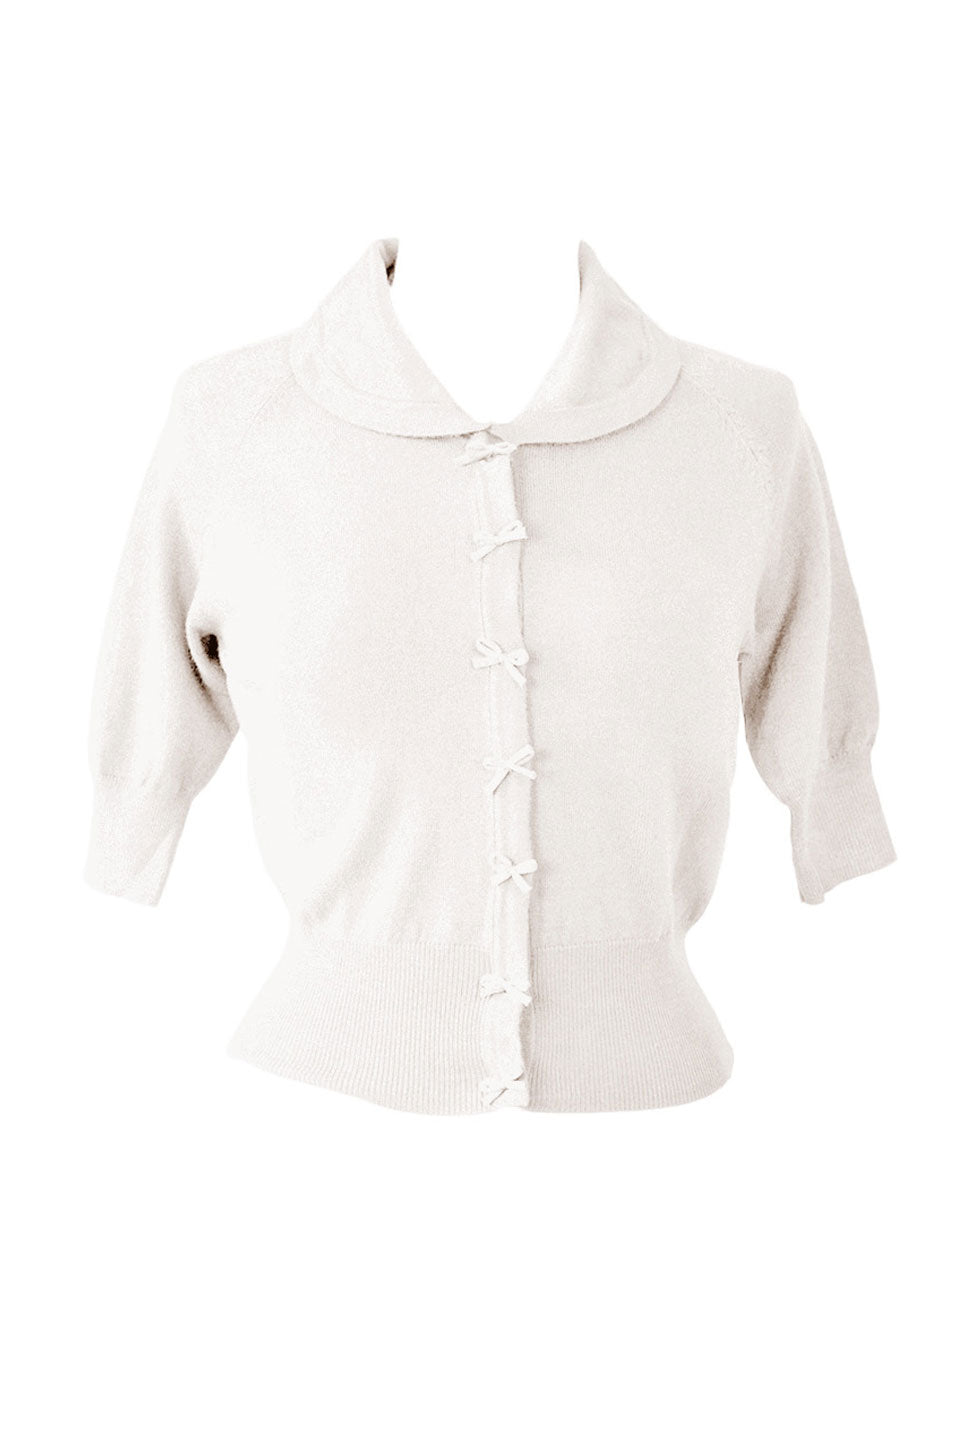 Cropped quarter length off white cardigan with bow details -1950s style | Weekend Doll